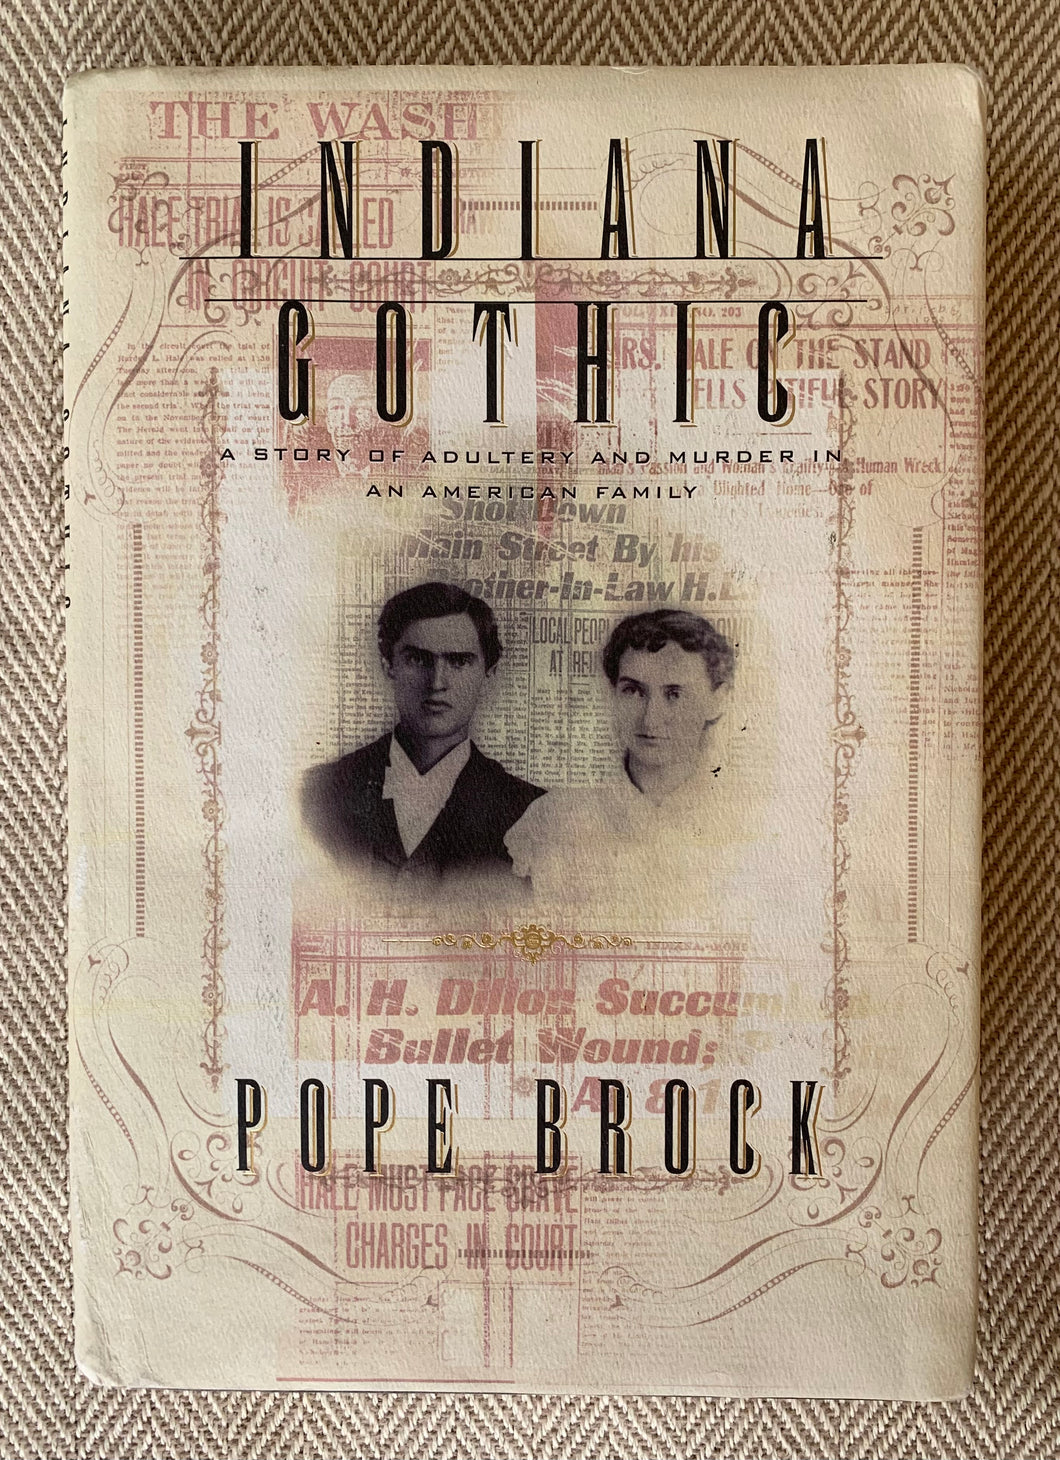 Indiana Gothic: A Story of Adultery and Murder in an American Family